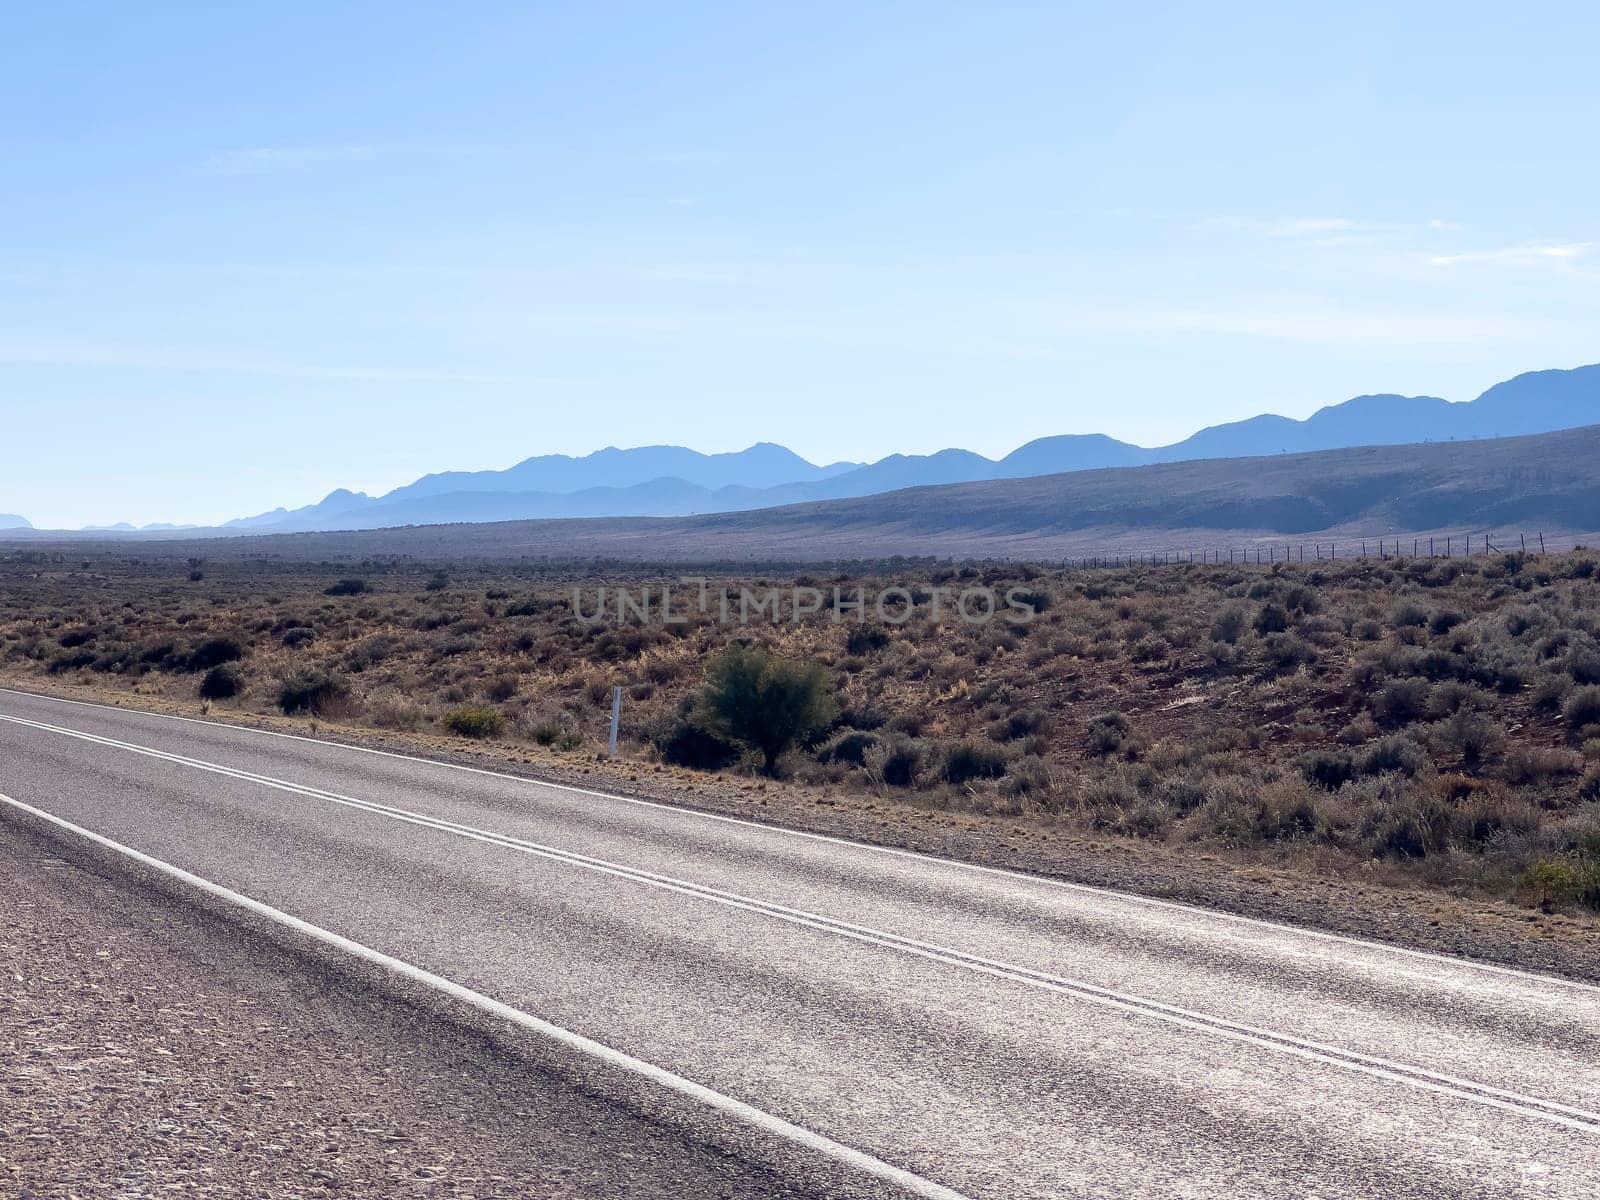 A long, deserted road stretches towards distant mountains in Ikara Flinders Ranges